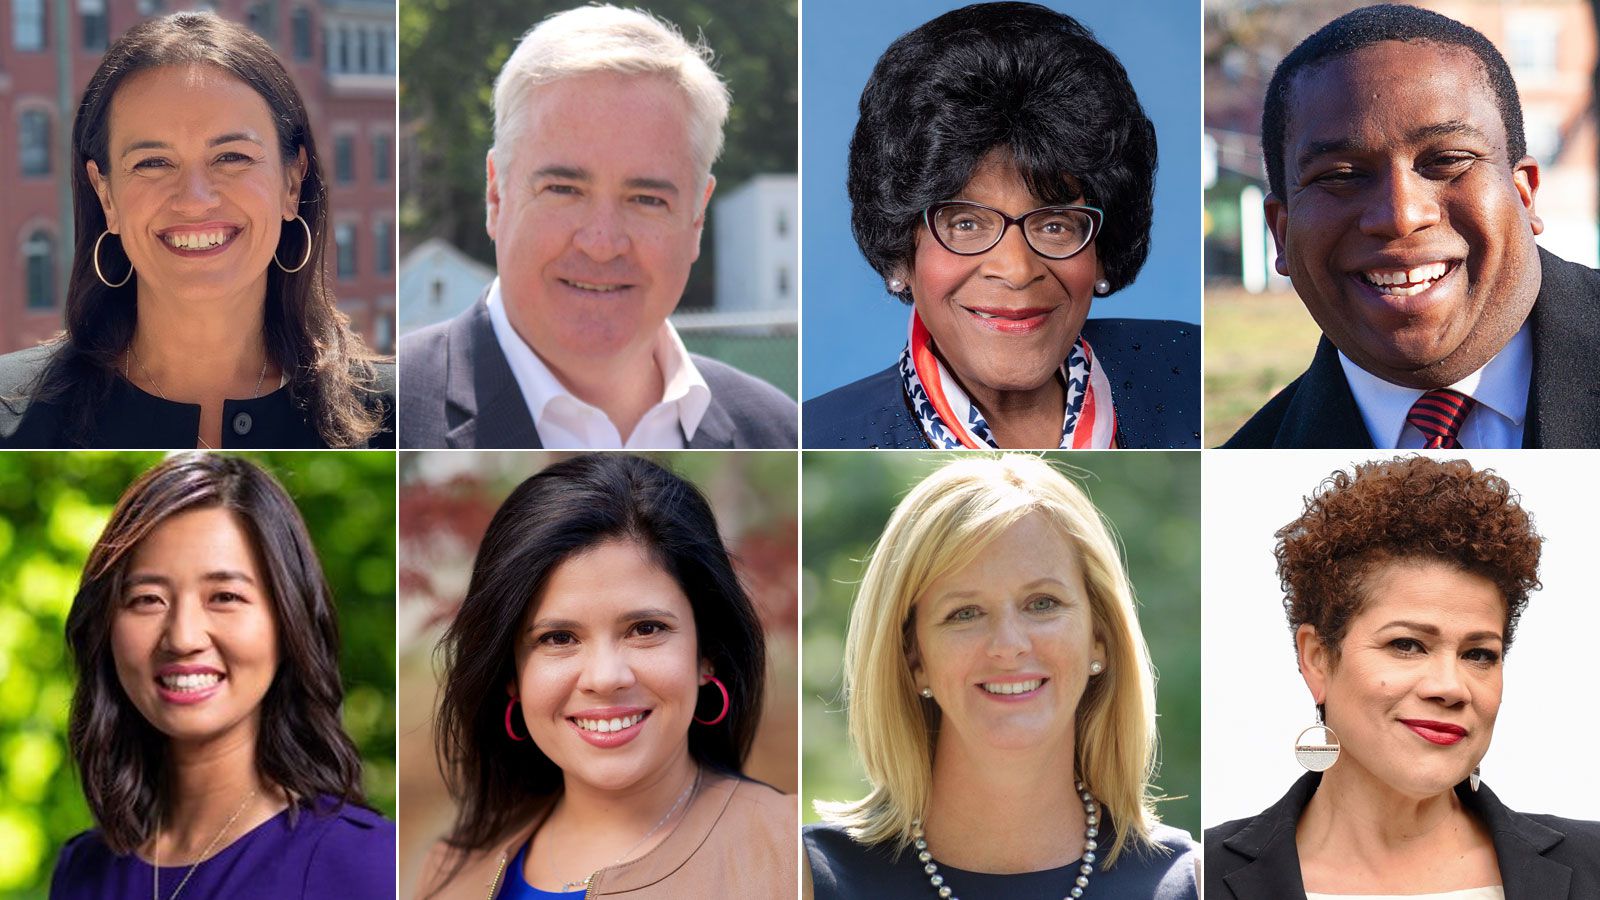 City Council candidates share their opinions on Boston's top issues